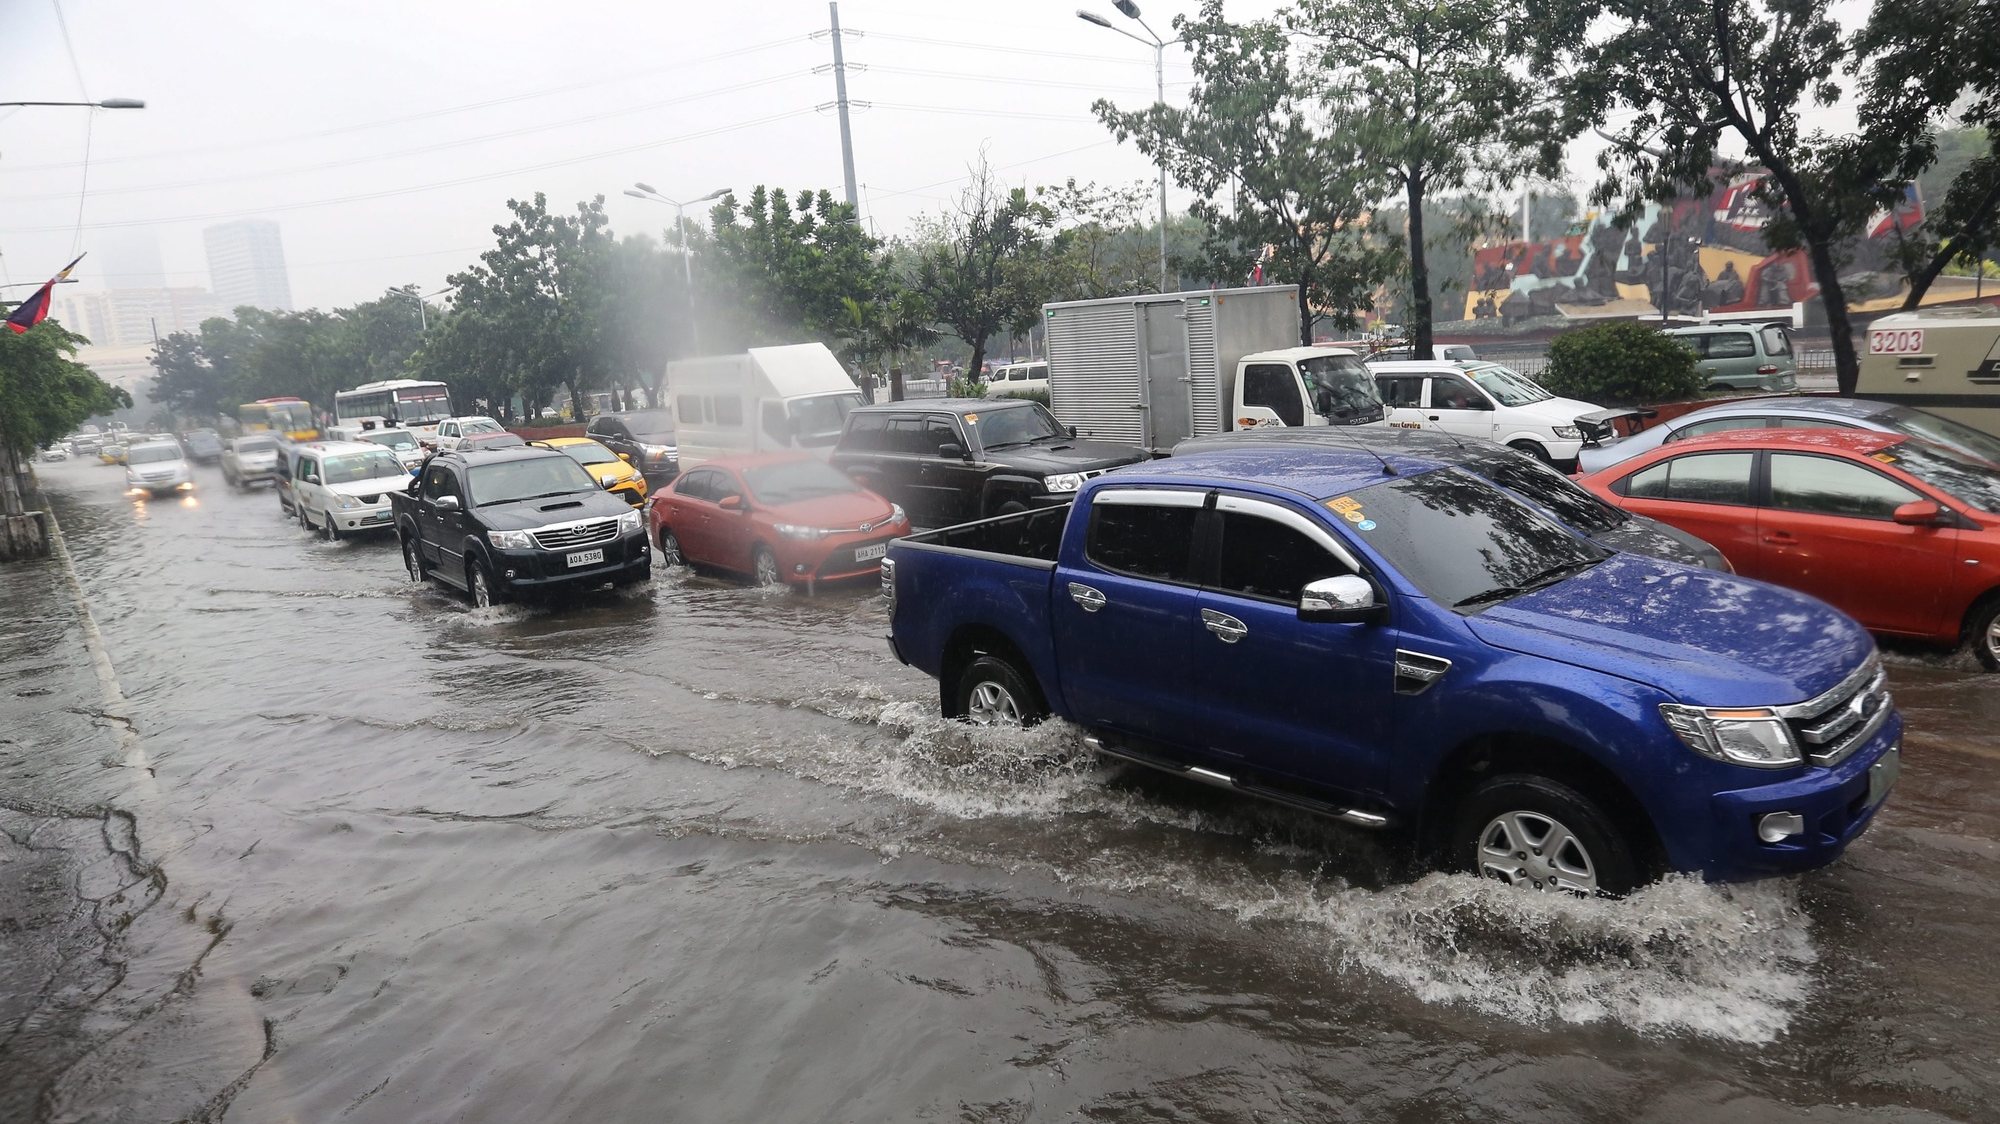 epa05074904 Vehicles make there way along a flooded road during a downpour in Manila, Philippines, 19 December 2015. The Philippines issued a warning against flash floods and landslides in its southern regions as a tropical depression threatened a return of heavy rains Friday. Tropical depression Onyok, the second storm to hit the country in a week, was expected to make landfall in Mindanao later in the day. Onyok, packing sustained winds of 55 kilometres per hour (kph), is expected to weaken into a low-pressure area passing the western Philippines early Sunday.  EPA/MARK R. CRISTINO